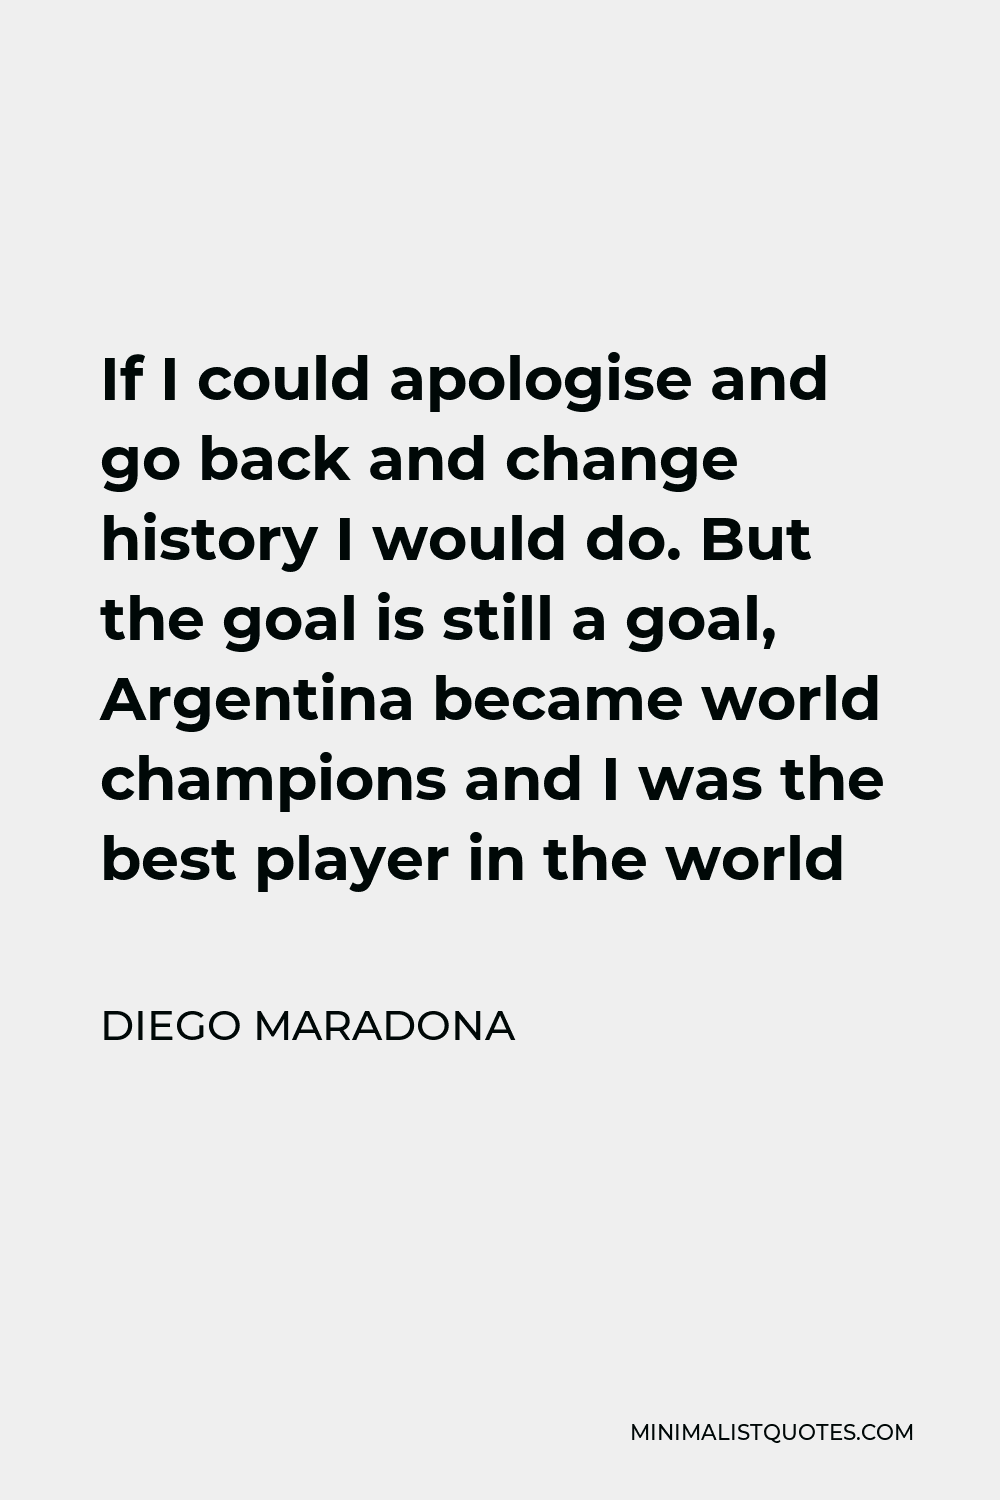 Diego Maradona Quote - If I could apologise and go back and change history I would do. But the goal is still a goal, Argentina became world champions and I was the best player in the world